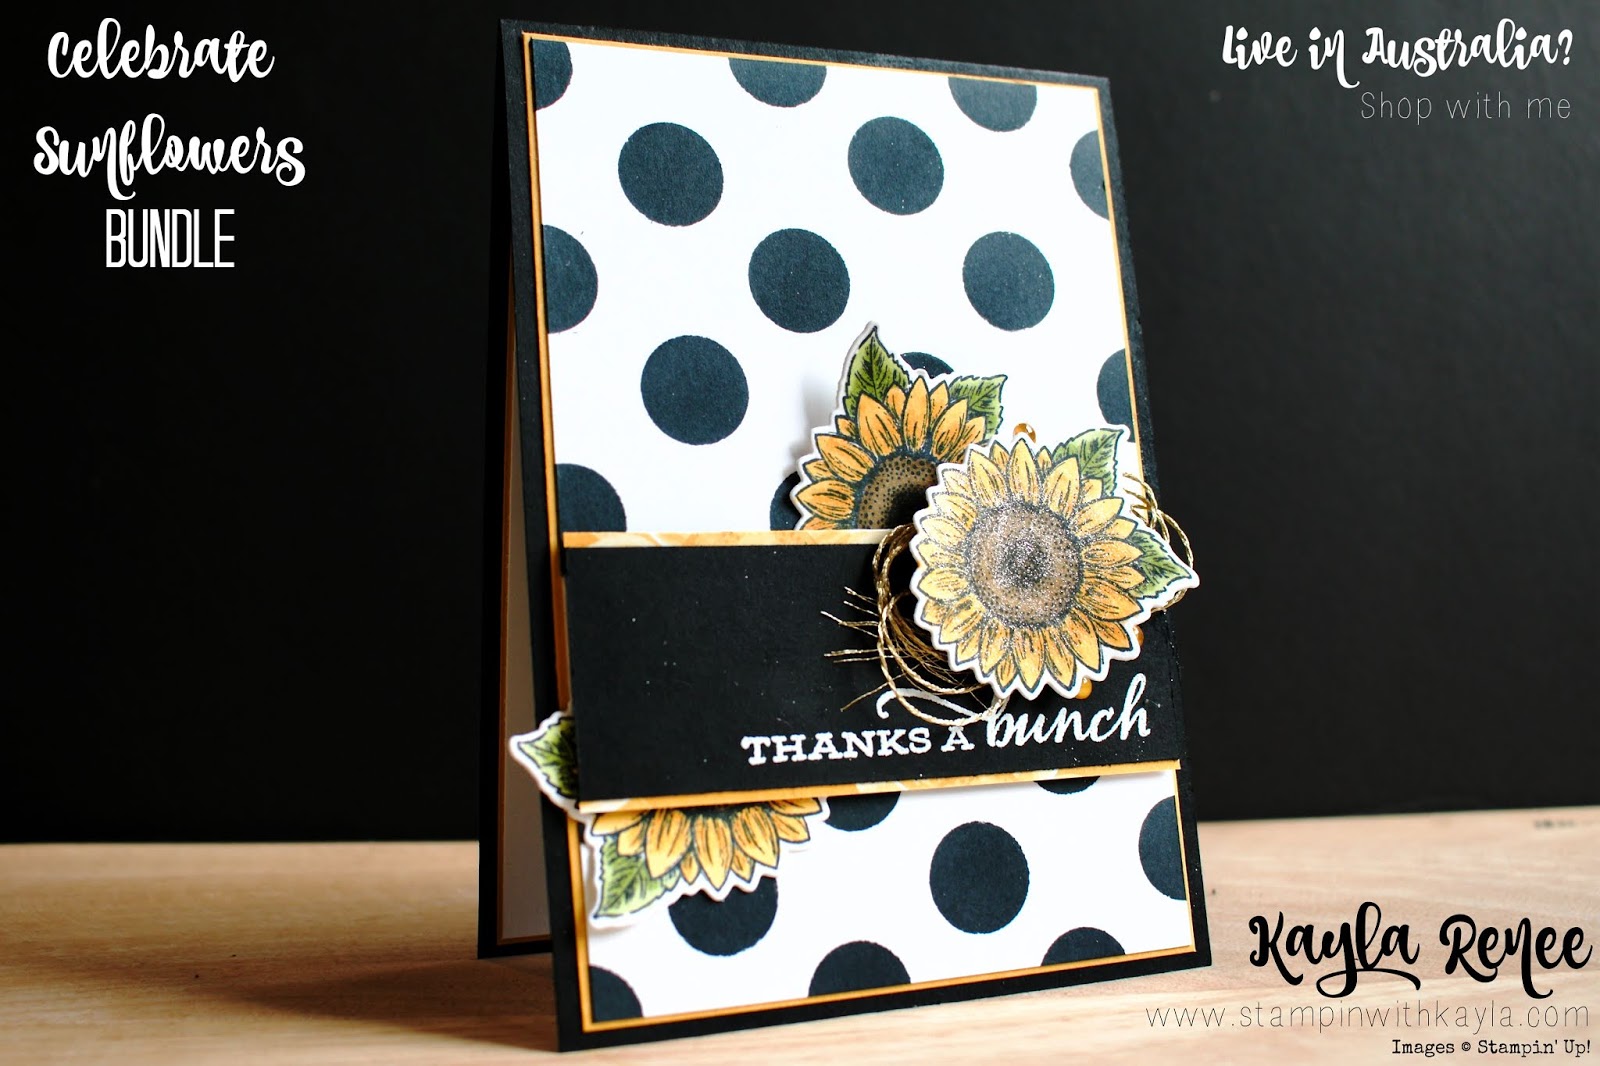 Celebrate Sunflowers ~ Thanks a Bunch Card